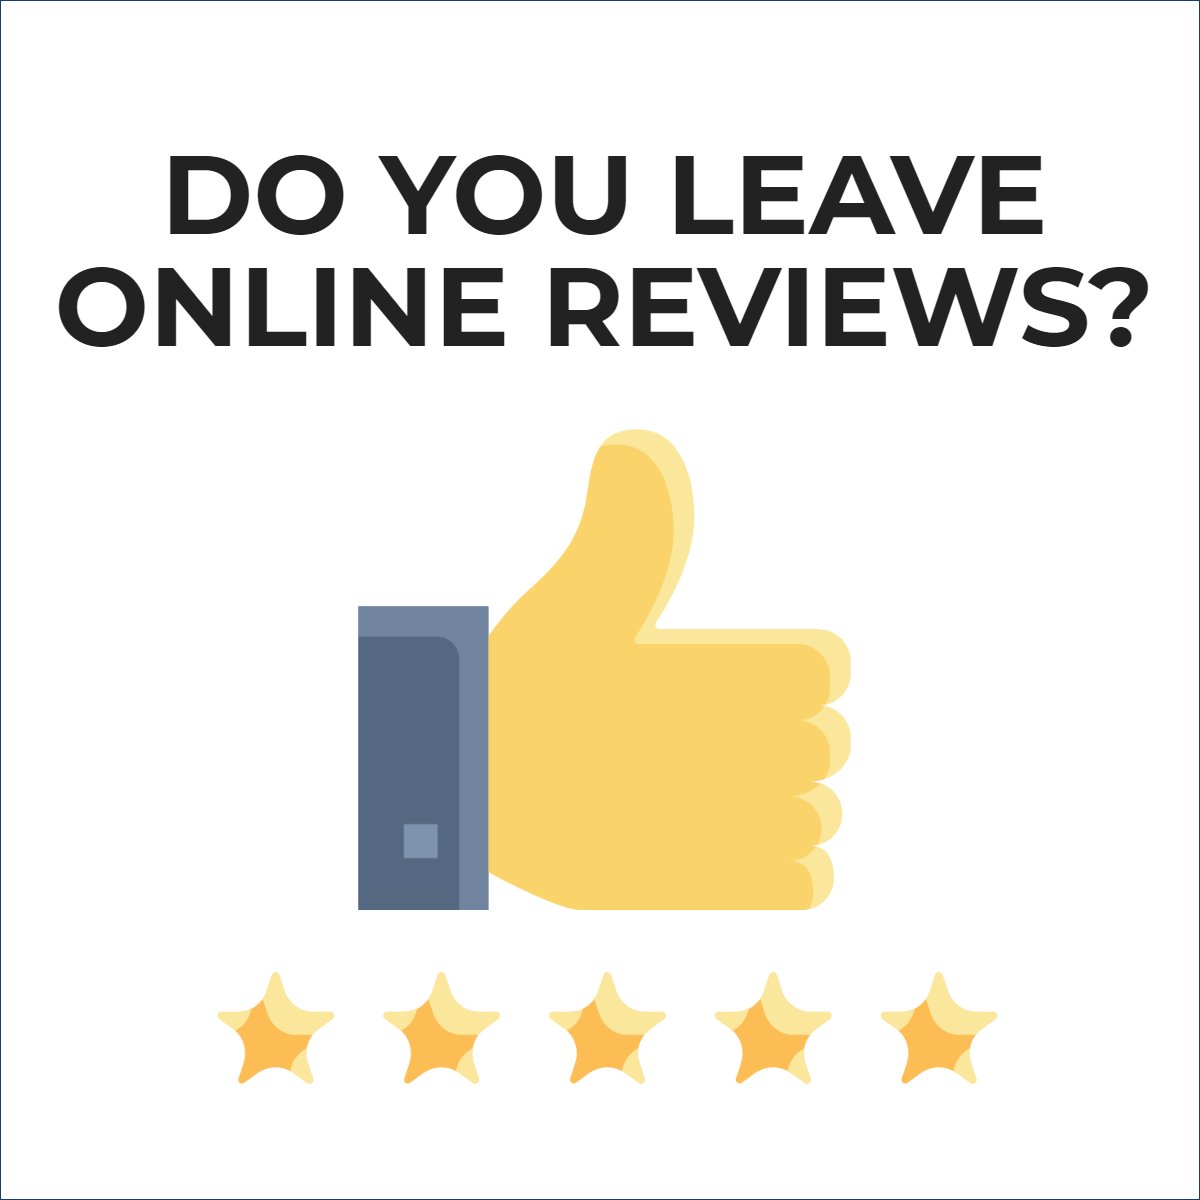 Did you know that 90% of consumers read online reviews before visiting a business? 😉

#onlinereviews #onlinereviewsmatter #realestate #realestatecoach #digitalmarketing #reviews #reputation 
 #kitchen